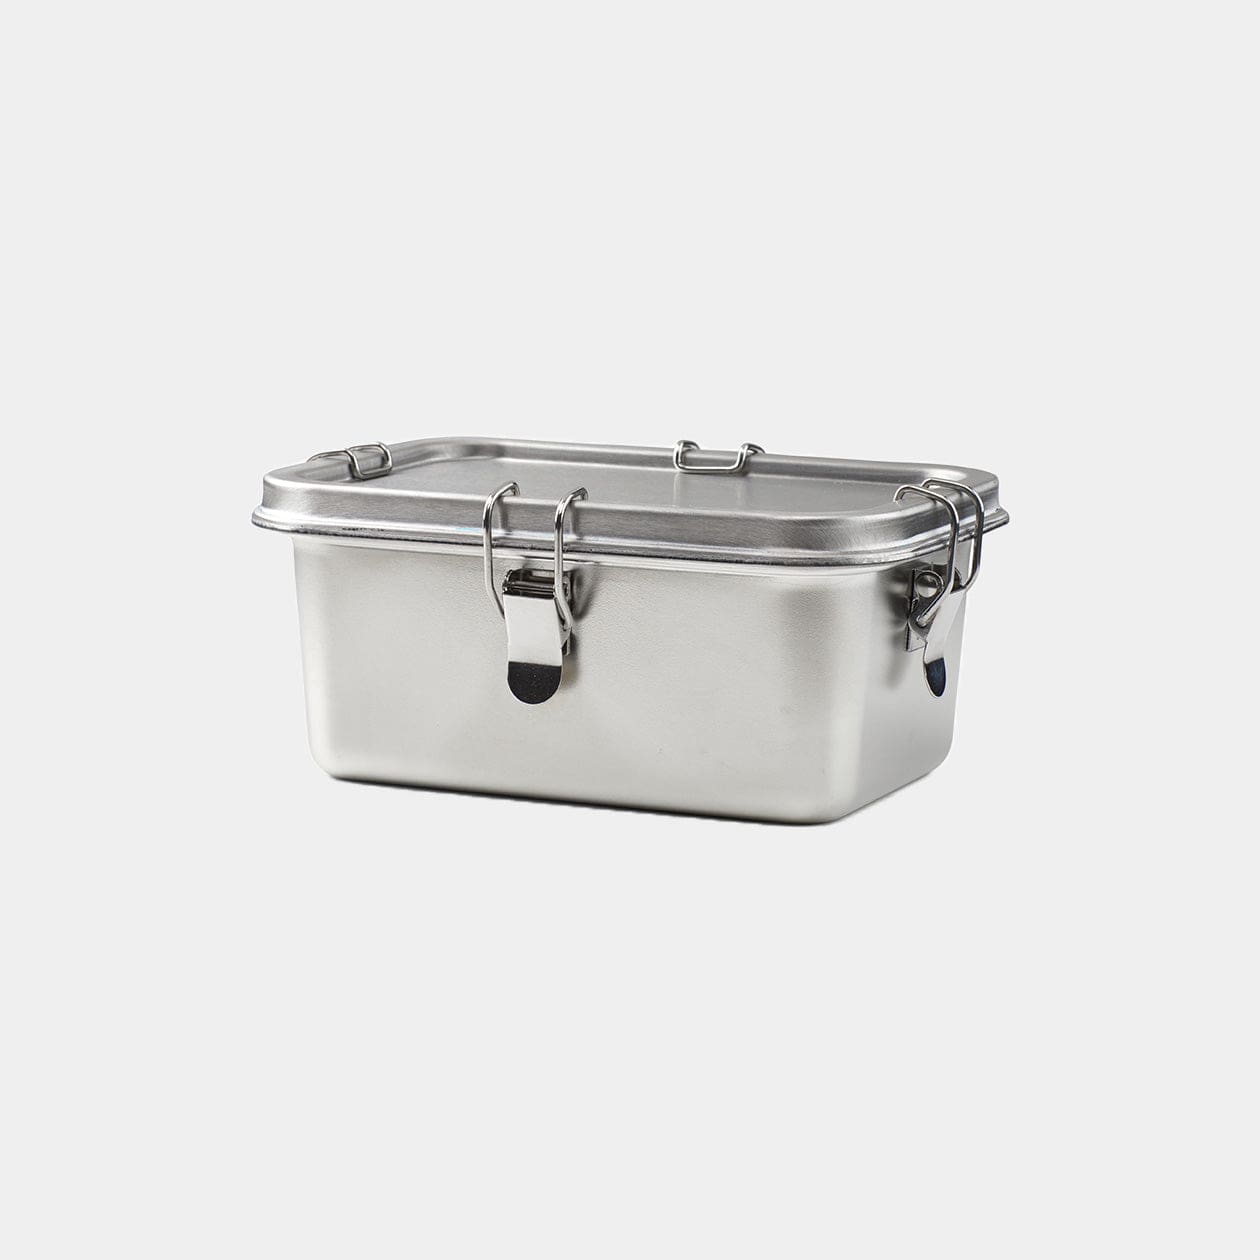 PlanetBox Launch Stainless Steel Lunchbox